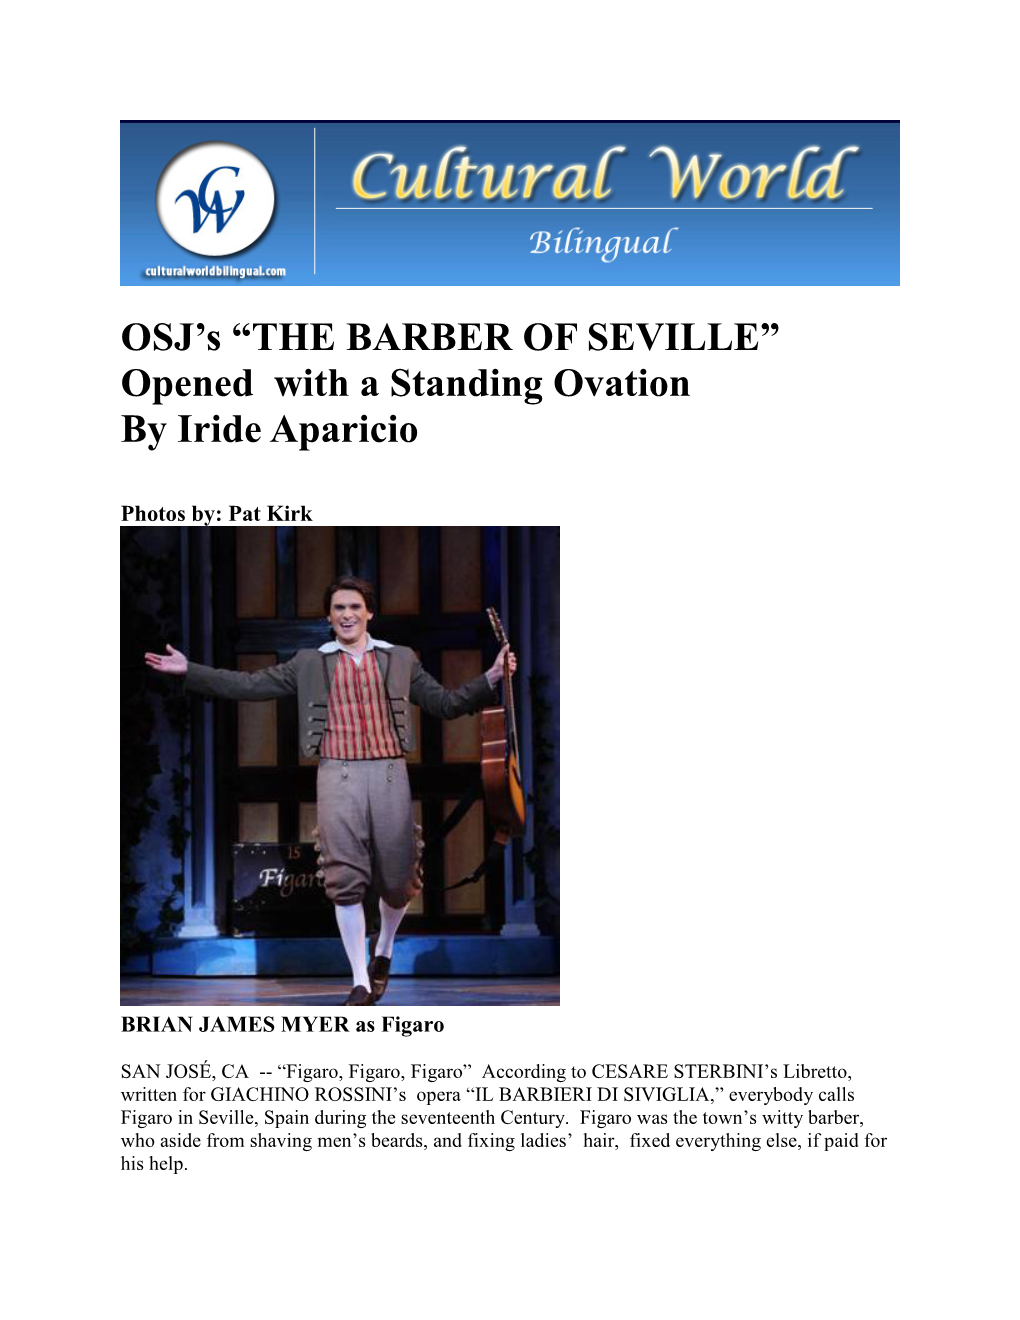 THE BARBER of SEVILLE” Opened with a Standing Ovation by Iride Aparicio